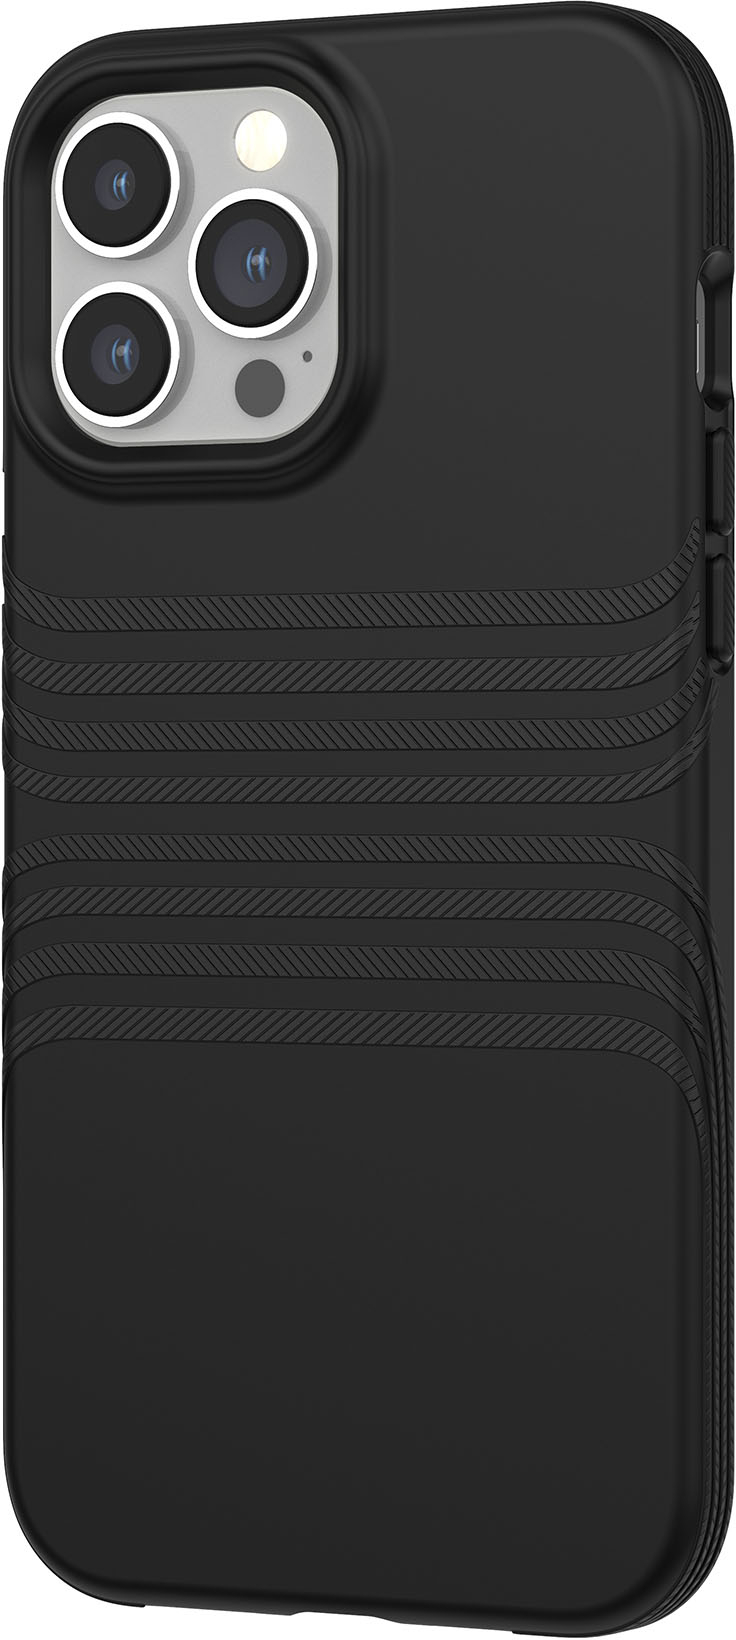 Tech21 EvoMax with Holster Hard Shell Case for Apple iPhone 13 Pro Max &  iPhone 12 Pro Max Black 55709BBR - Best Buy